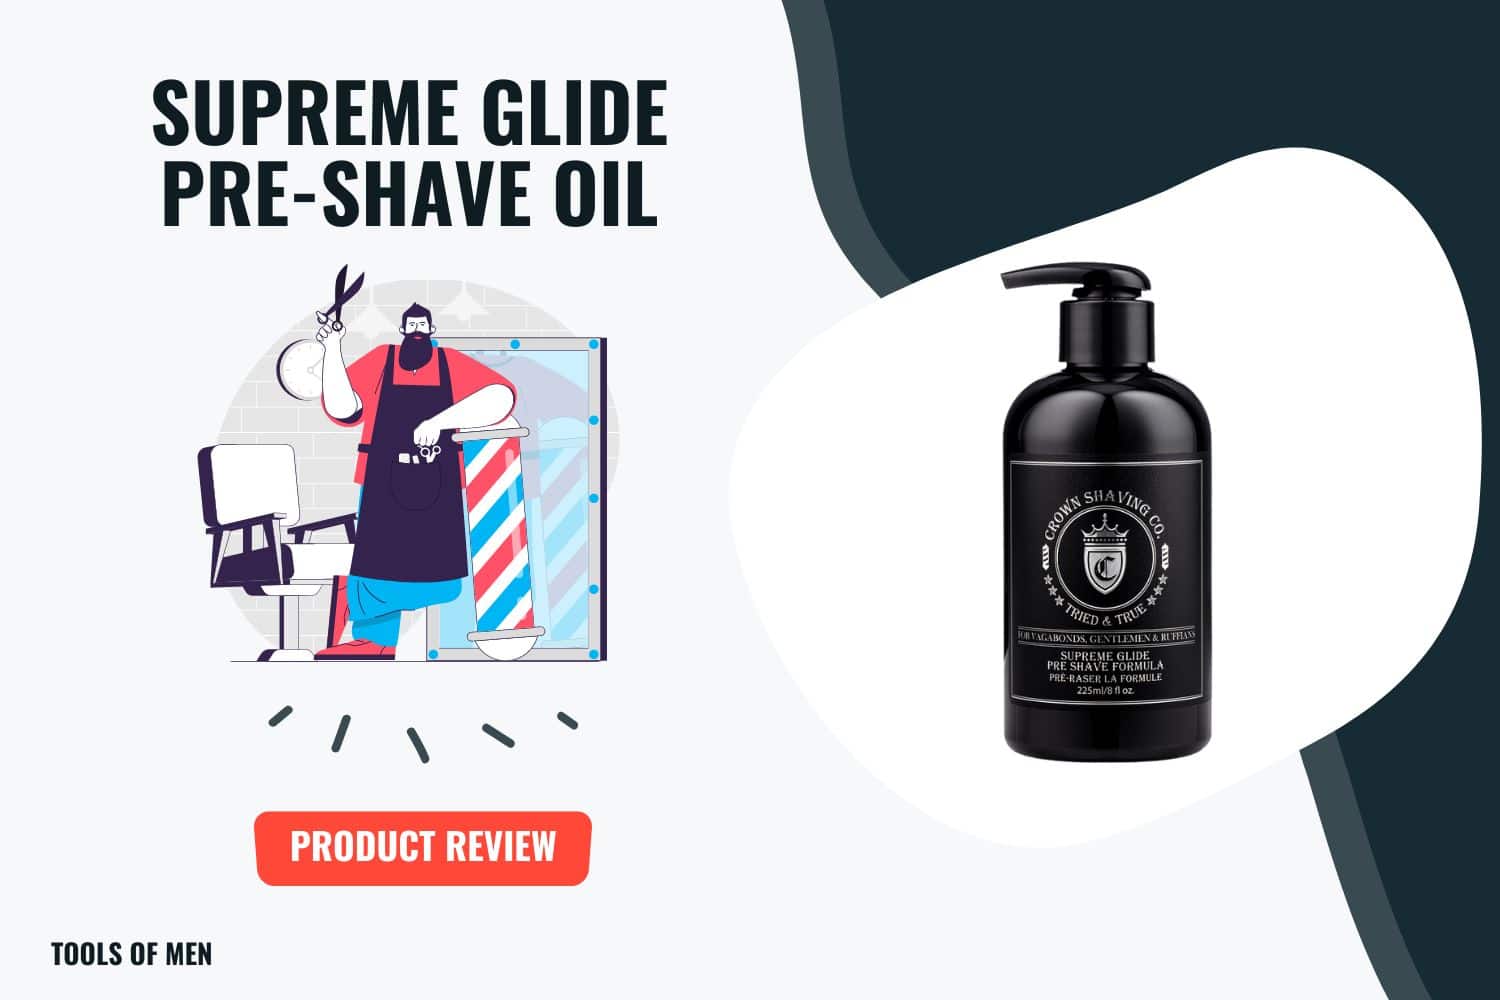 generic image of supreme glide shave oil on right